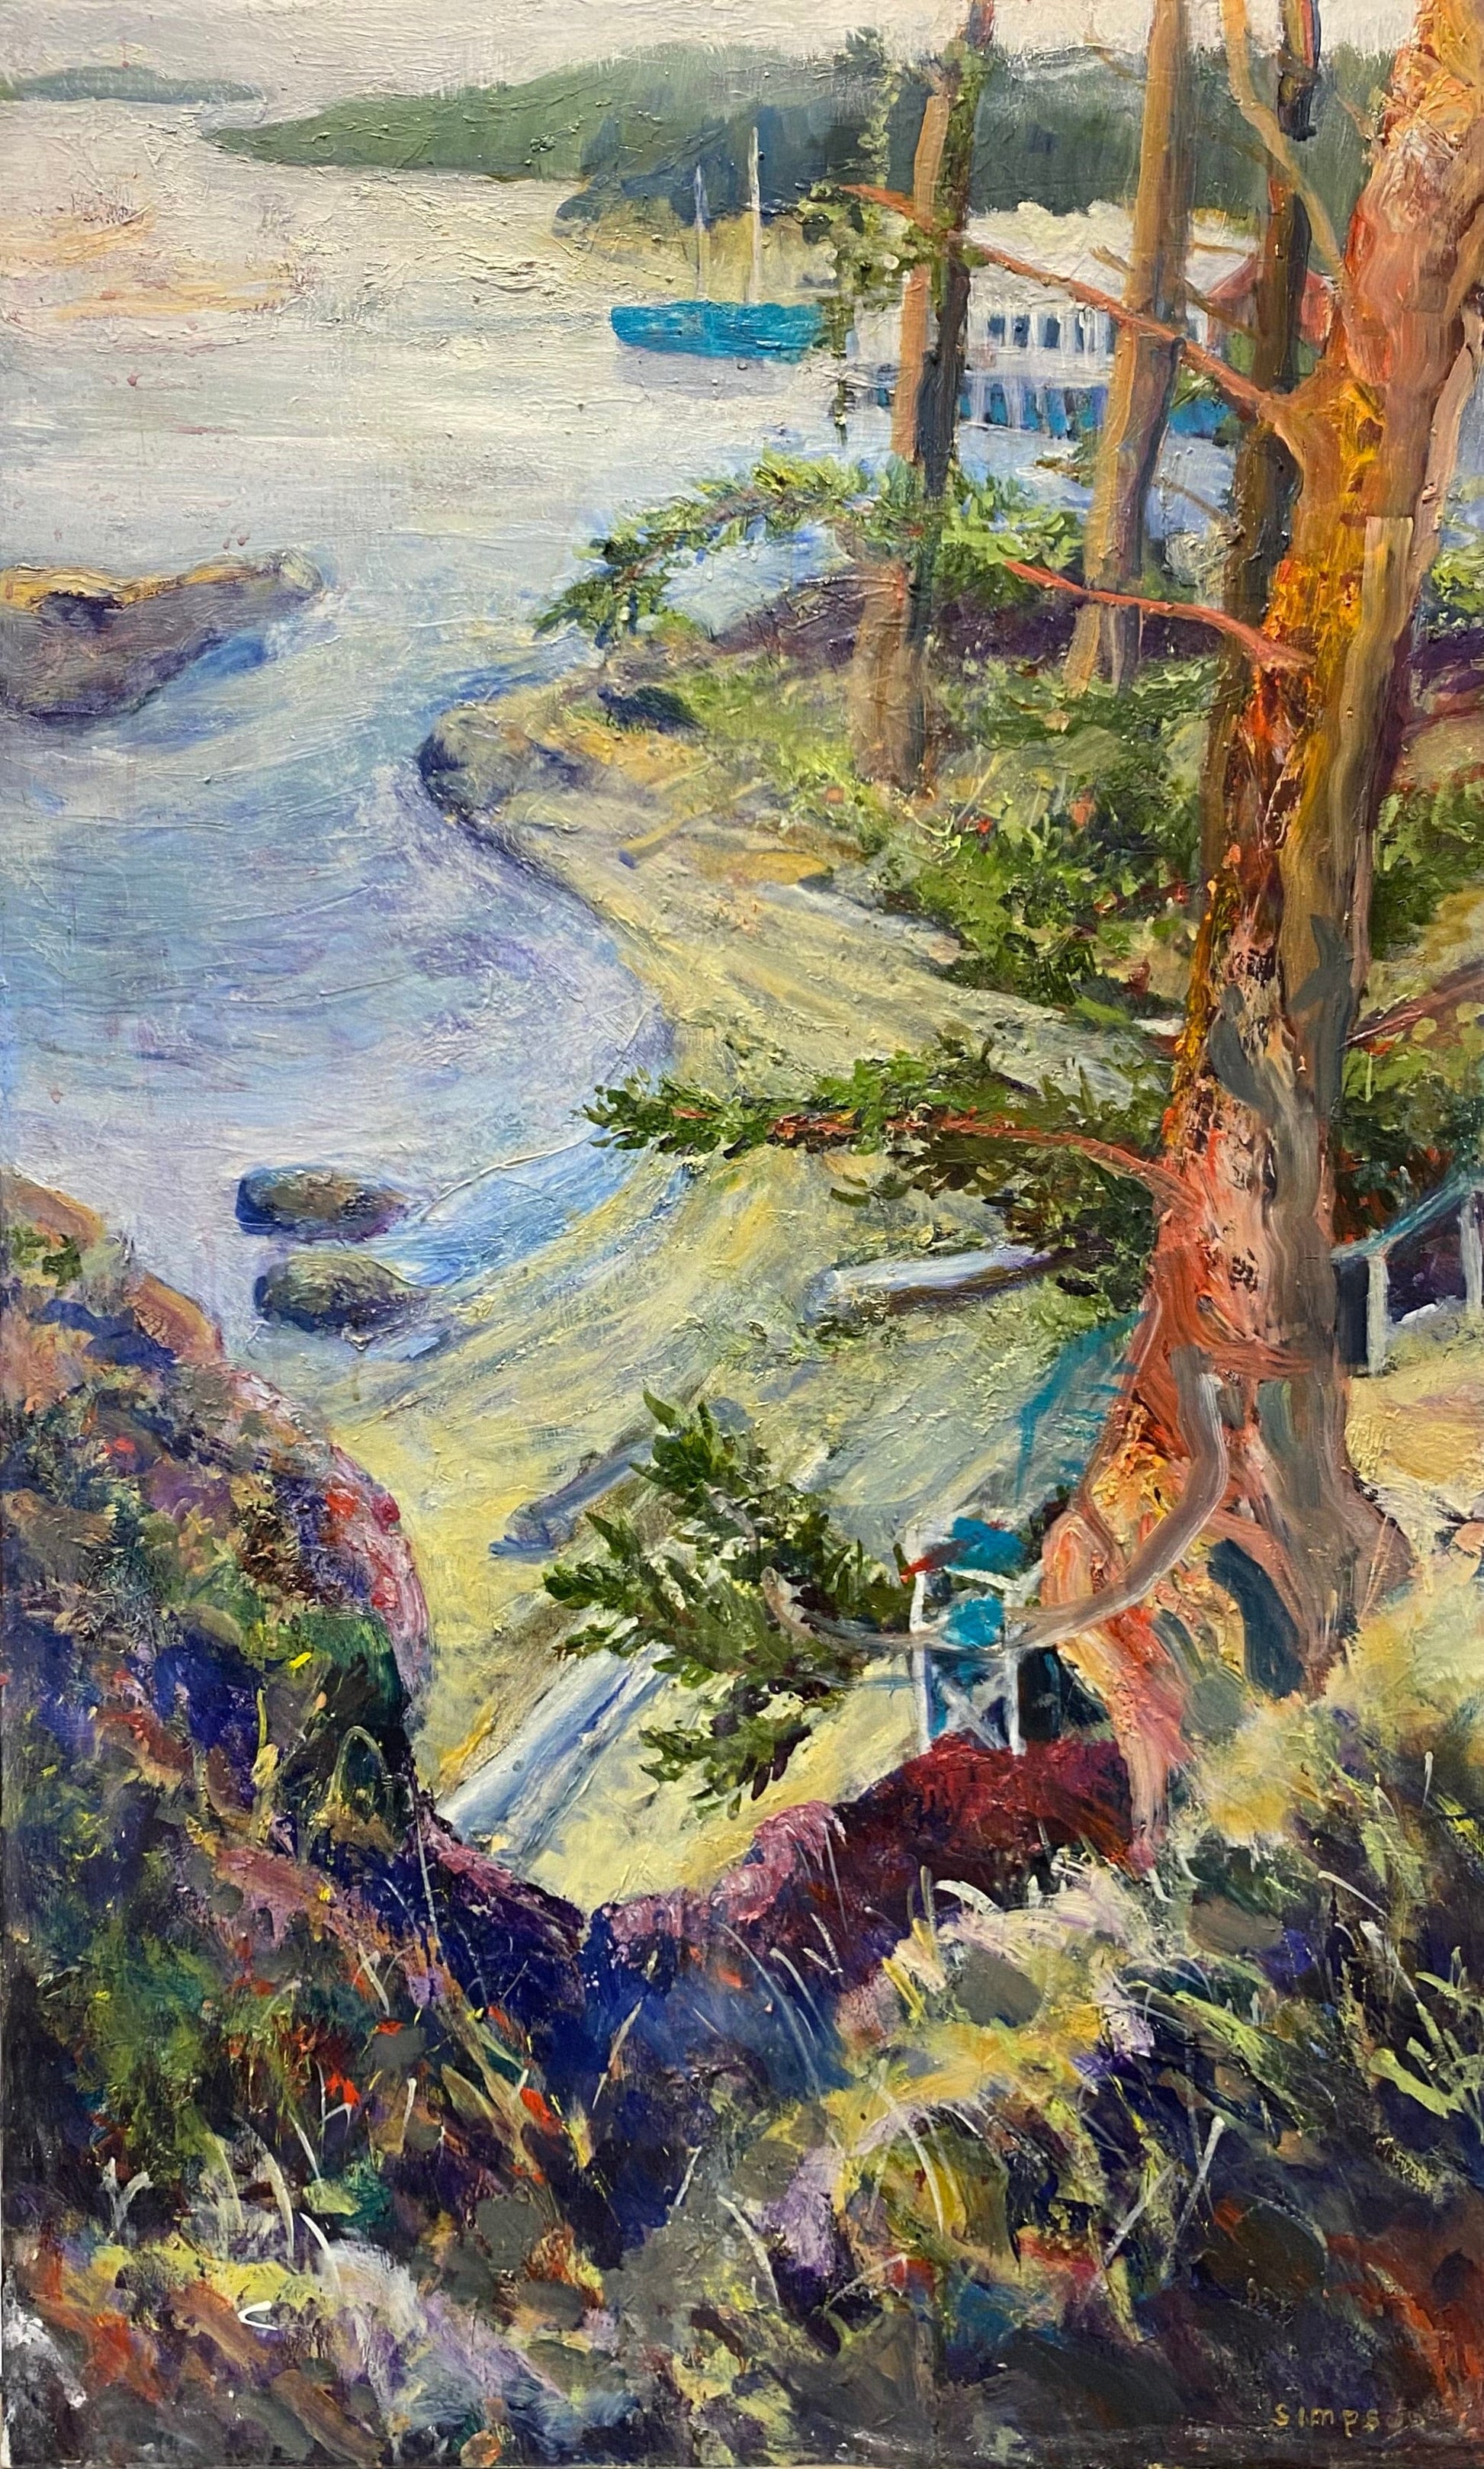 Vern Simpson painting Secret Beach at Welcome Bay Art Works Gallery